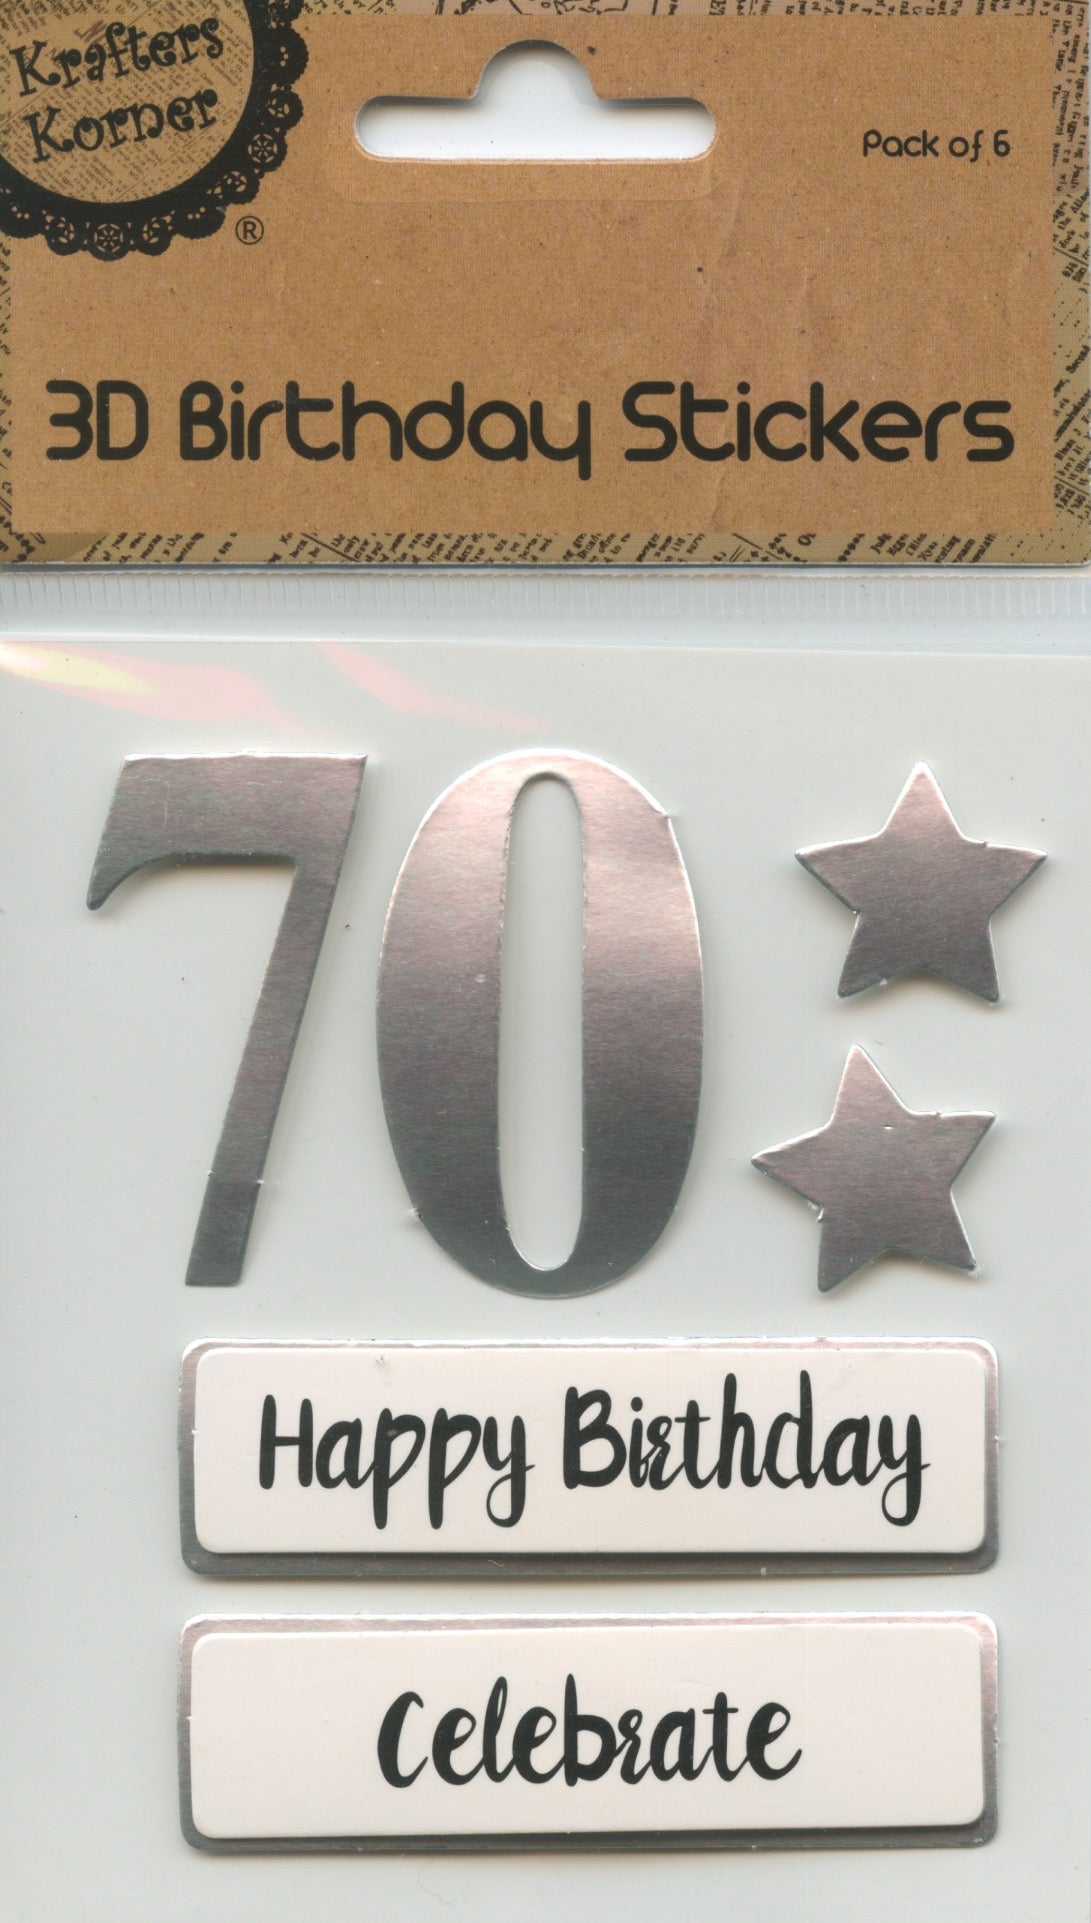 70th - 3D Birthday Stickers - Silver with Stars and Wording